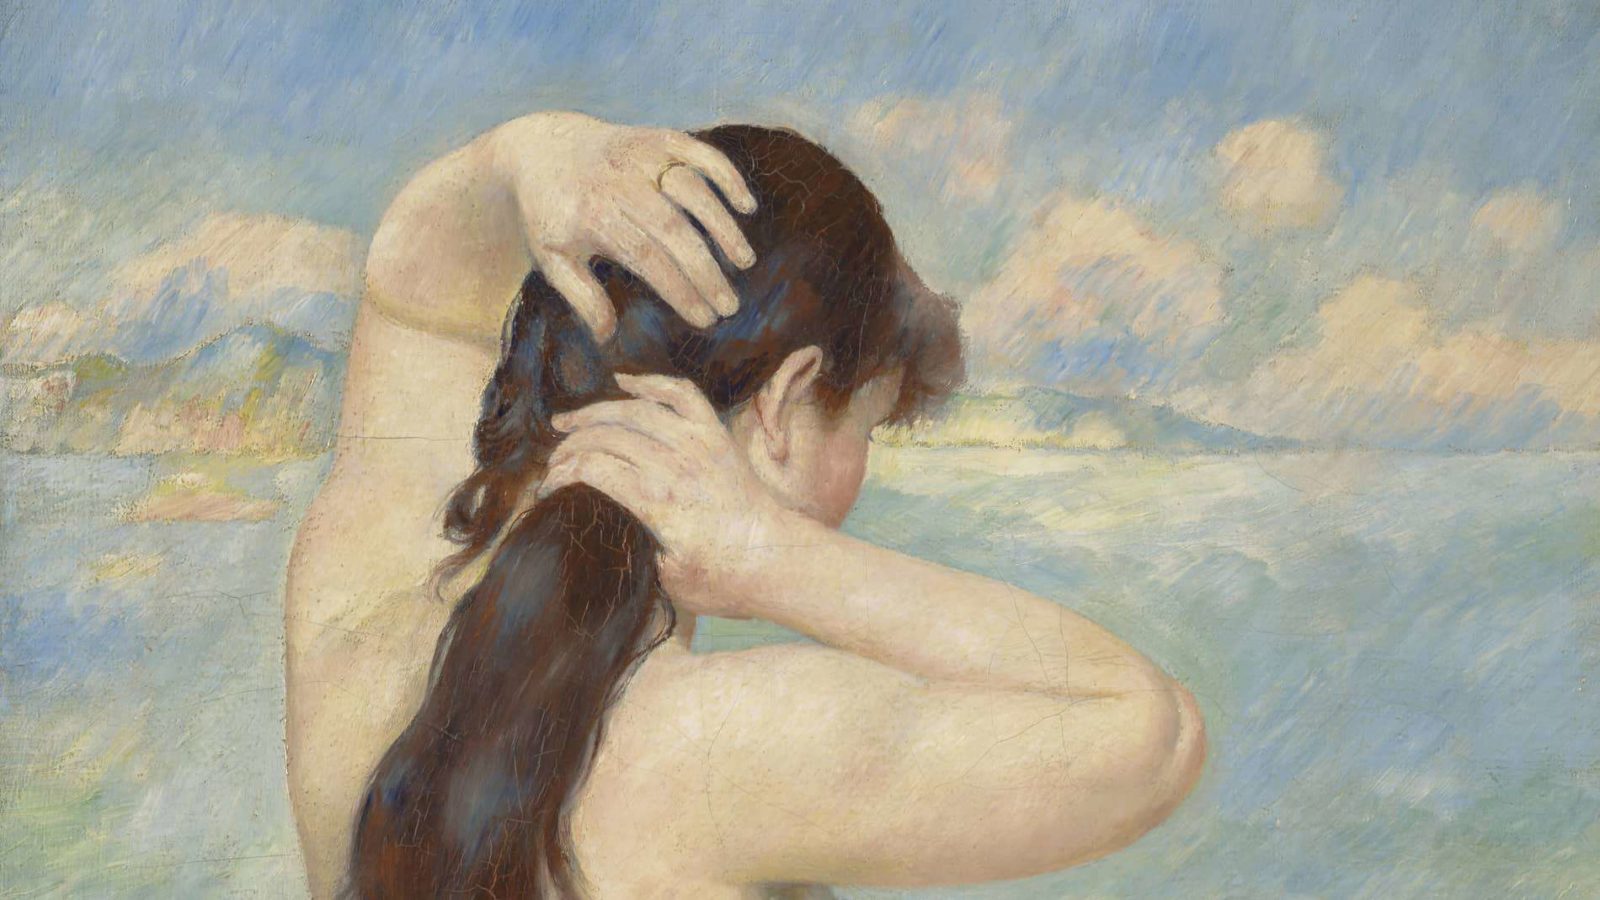 Renoir's Bather Arranging Her Hair appears in The Body, the Senses at the Clark Art Institute.